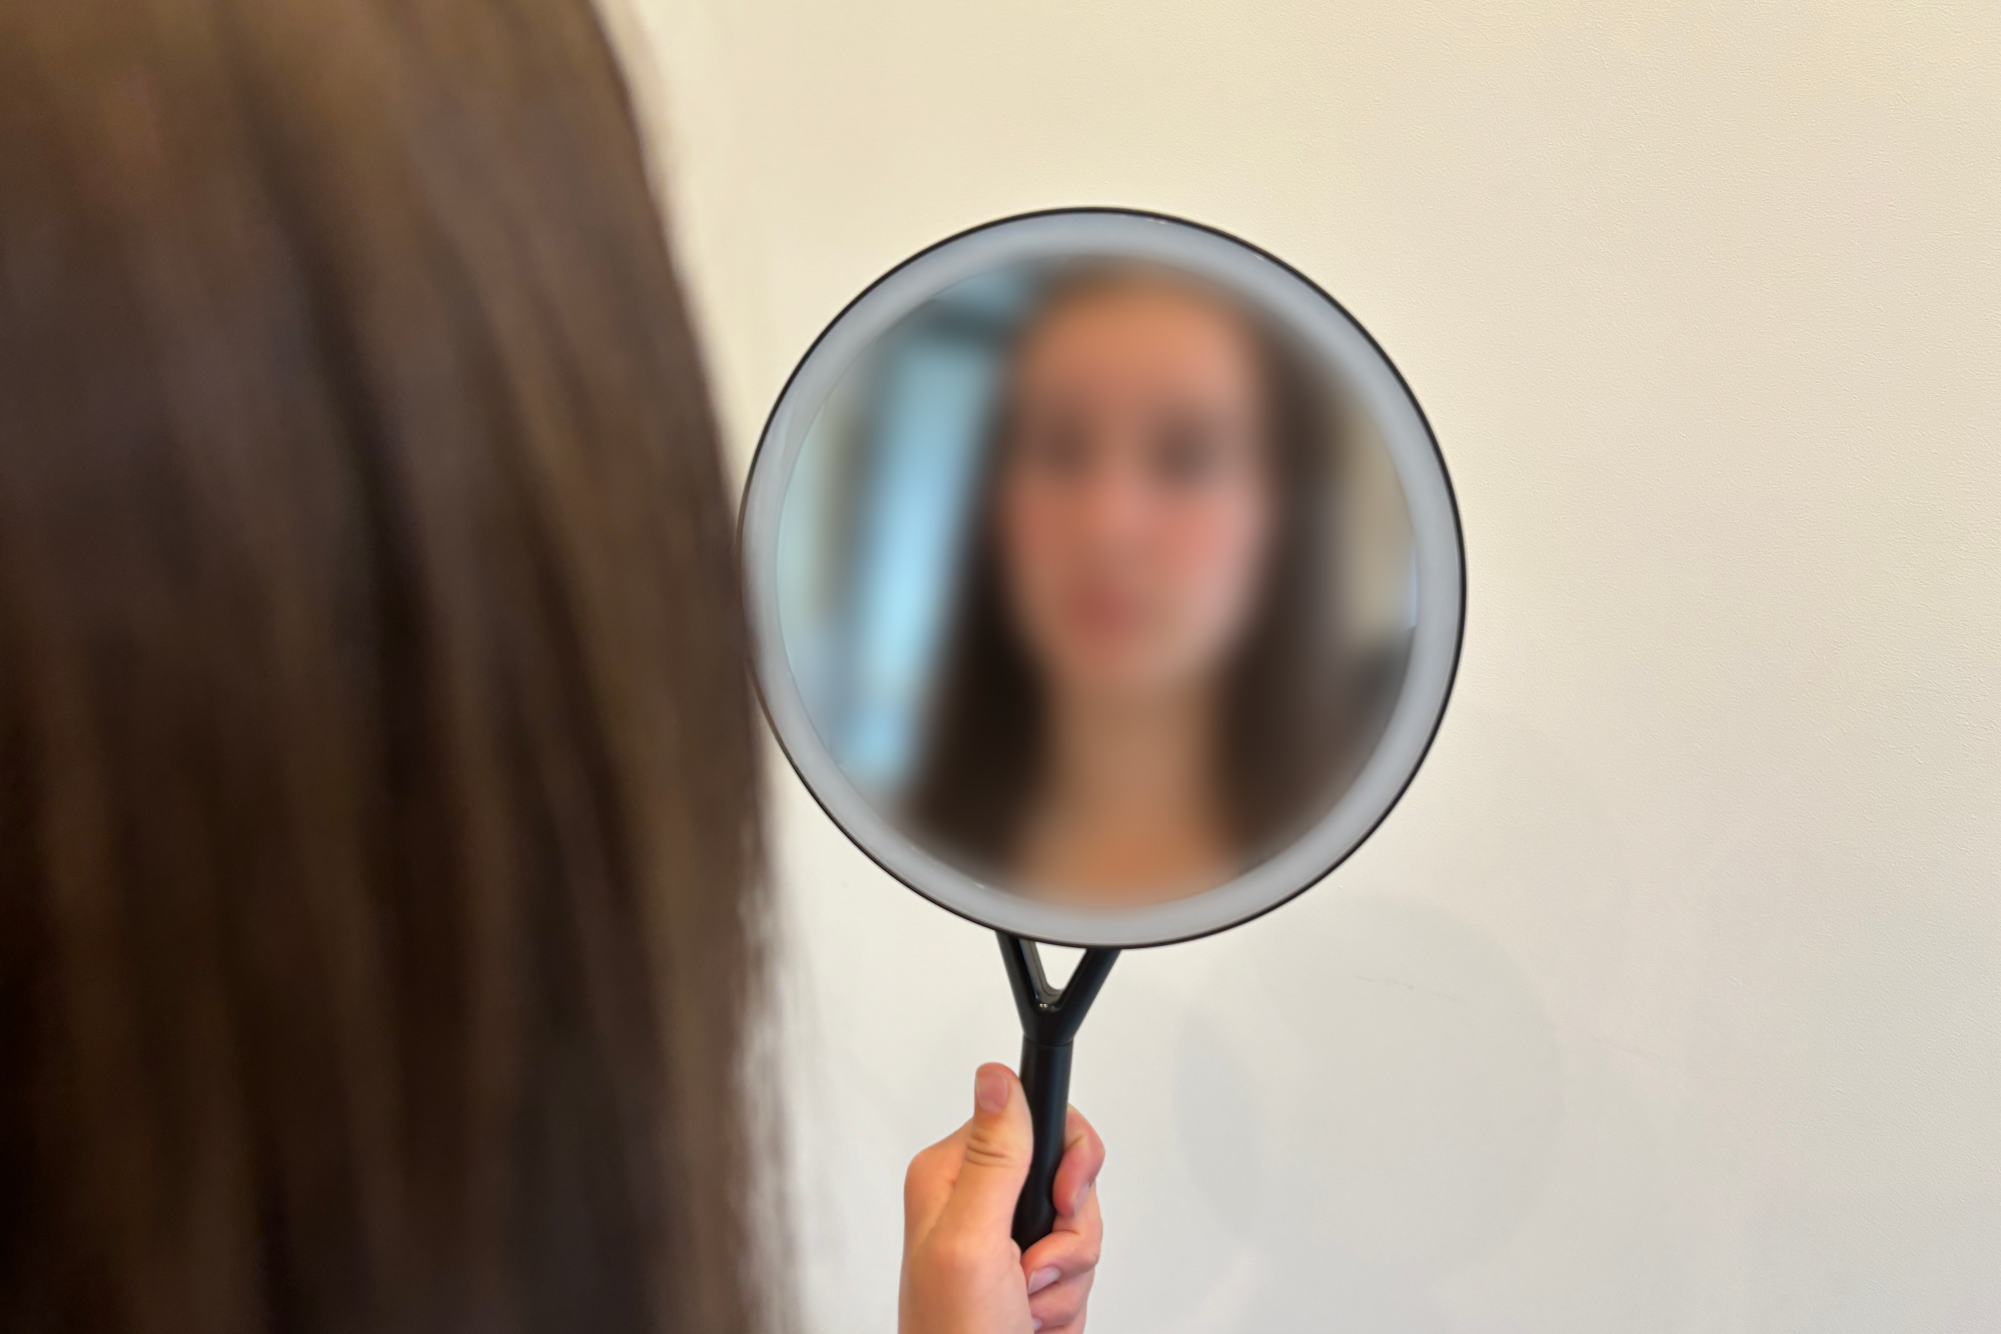 I hold a handheld mirror, looking at my blurred reflection. Society has conditioned women to feel unsatisfied with their appearance. Photo illustration by Phoebe Measer.